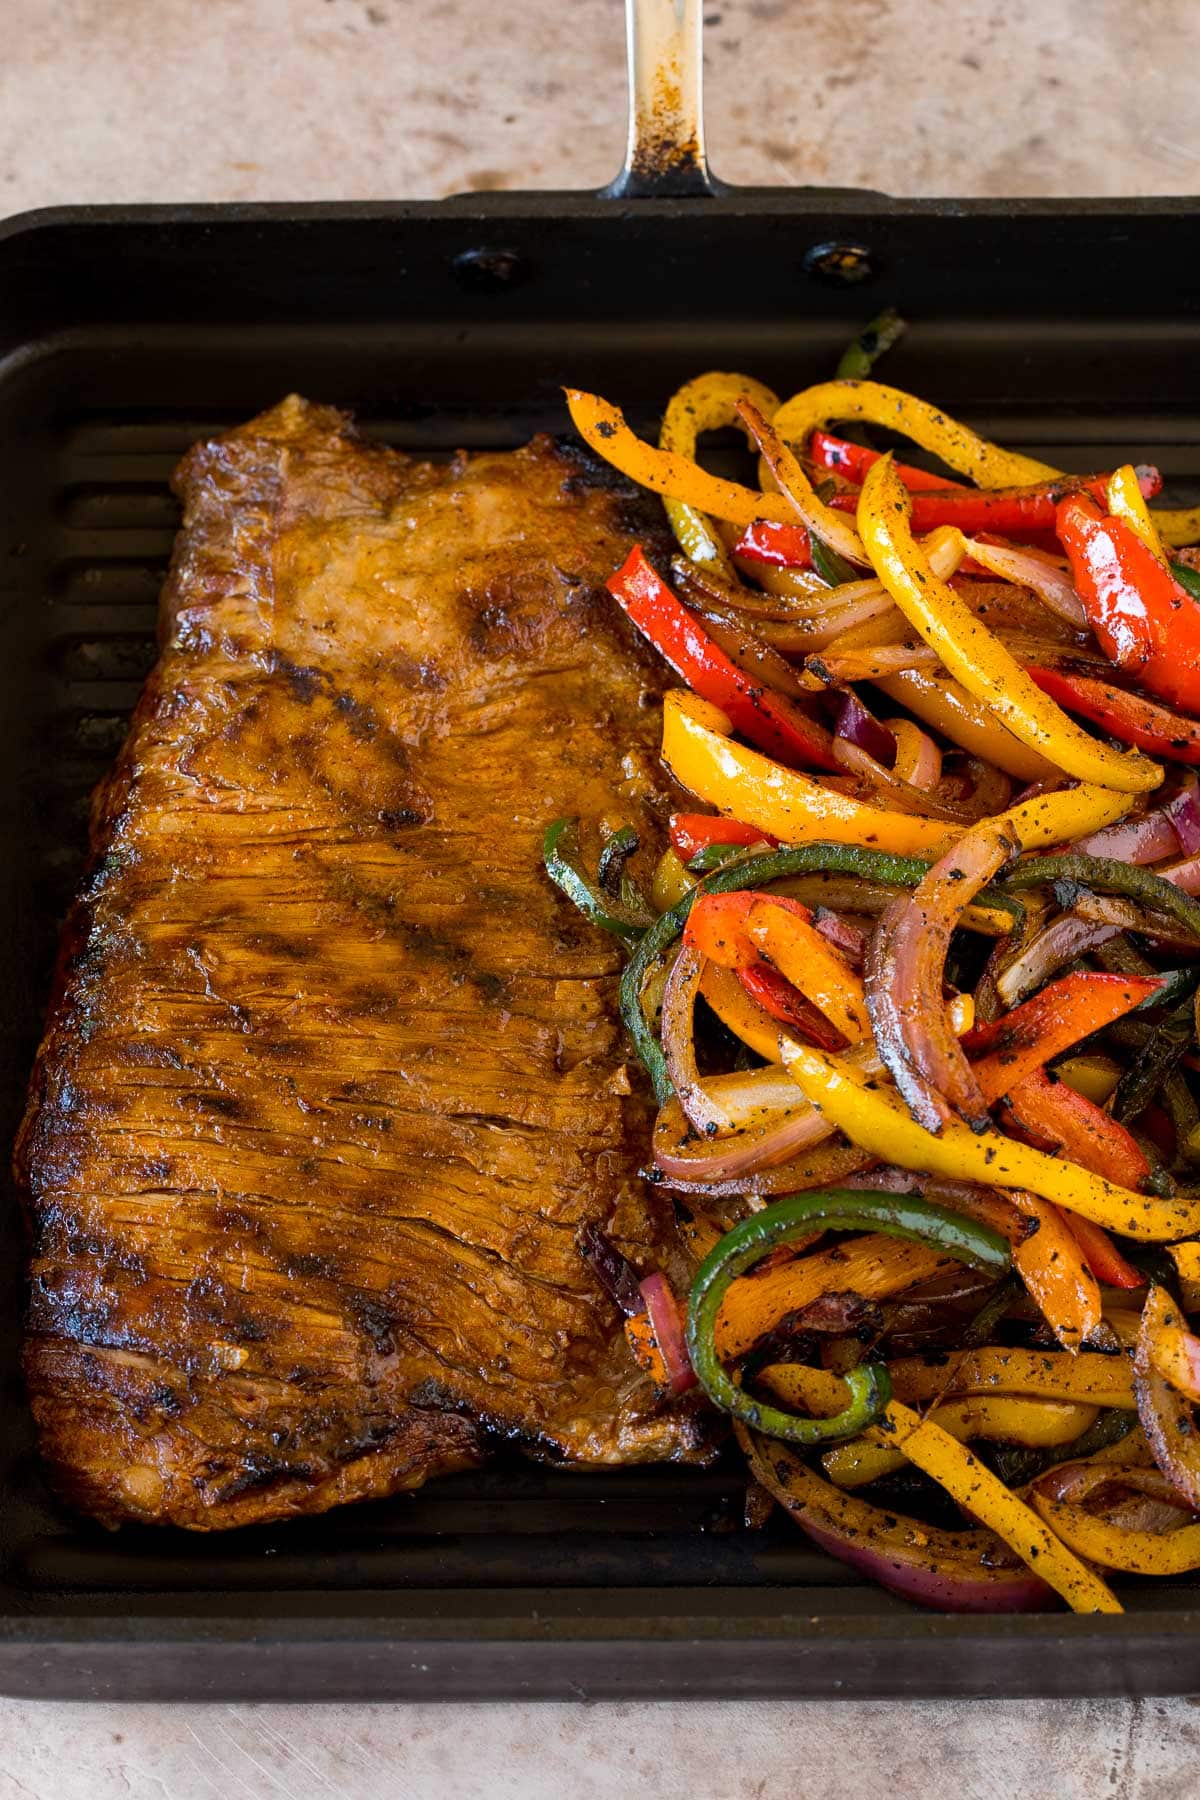 Flank steak and veggies cooked in a grill pan.